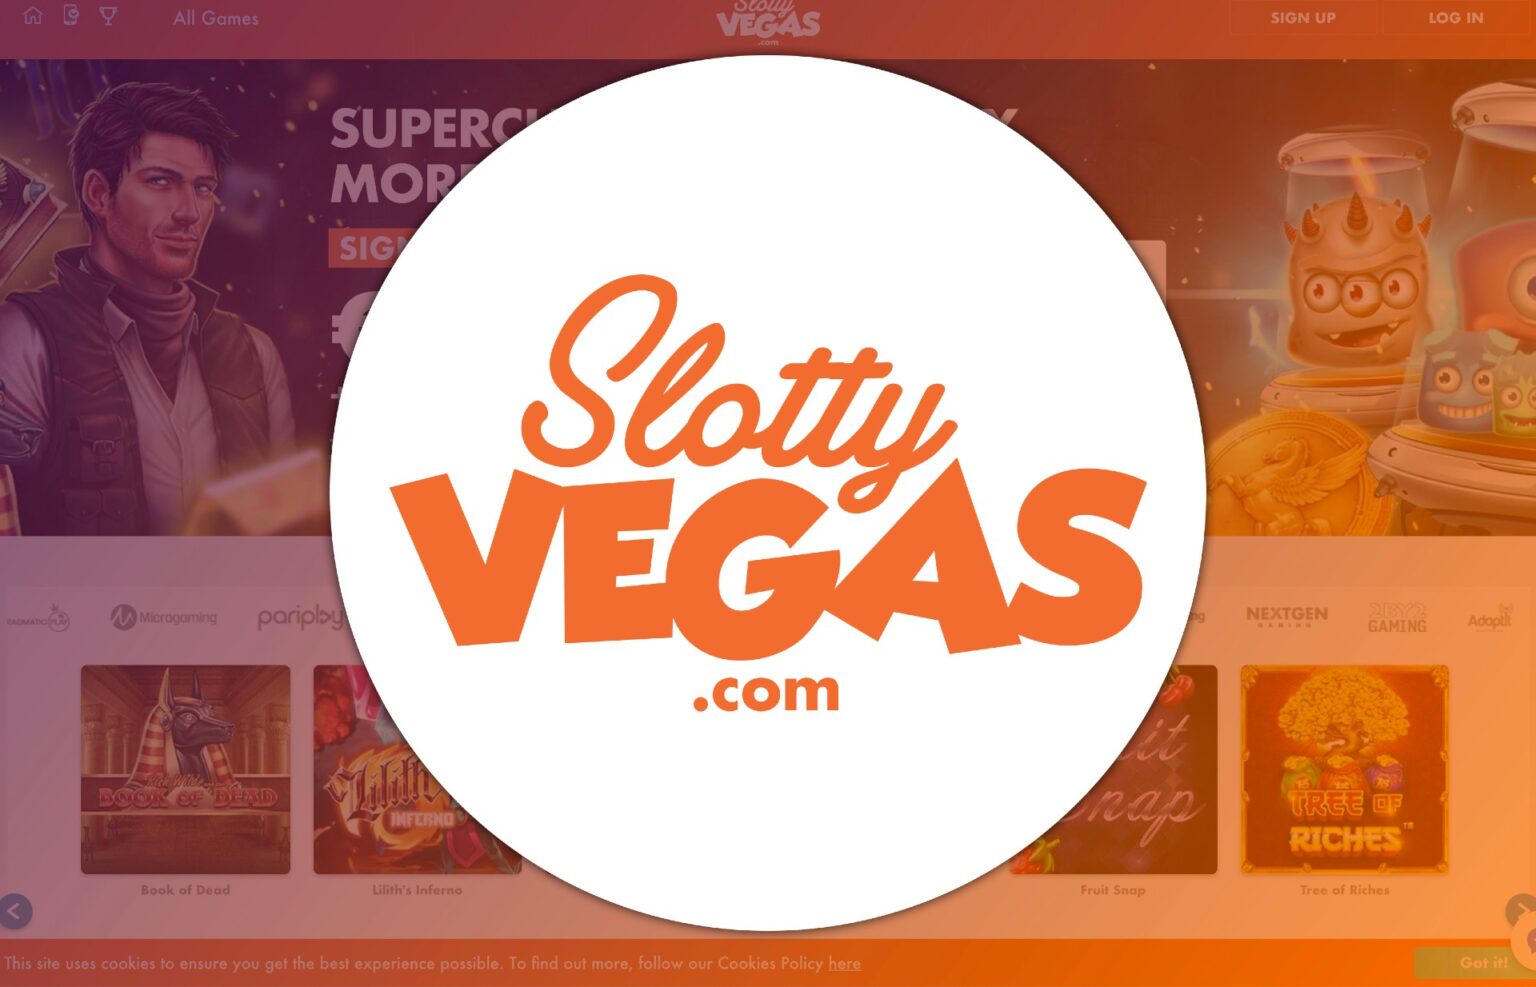 Slot players rejoice! Here's a breakdown of some of the best online slots that you should check out in the Netherlands.